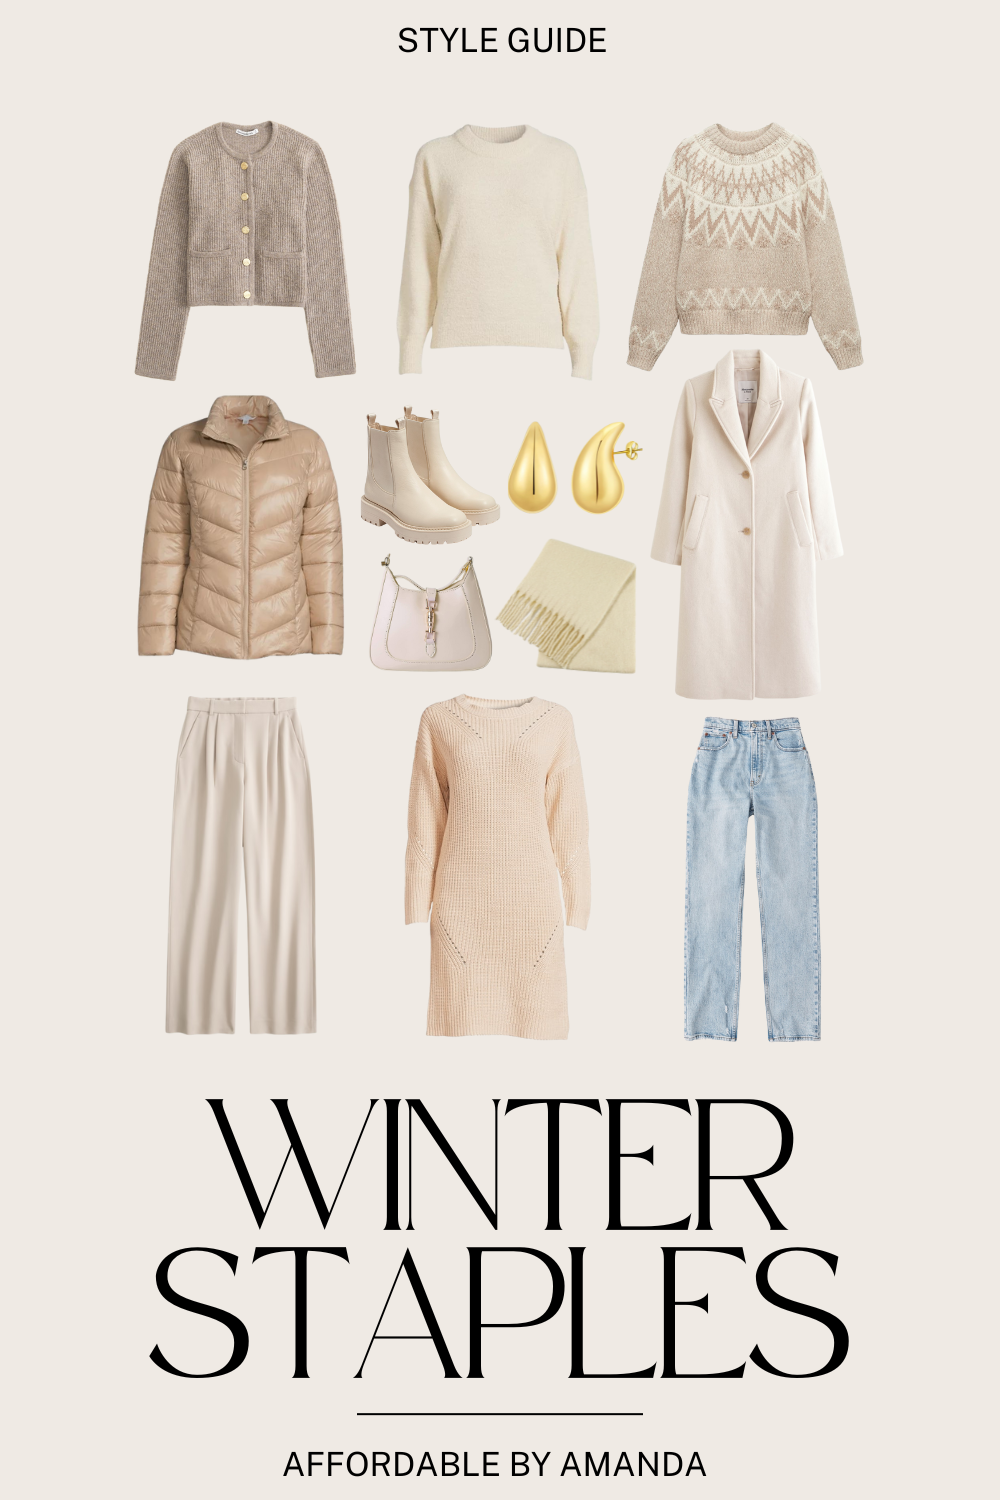 WINTER OUTFITS FOR WOMEN – TARGET WINTER CAPSULE WARDROBE STORY